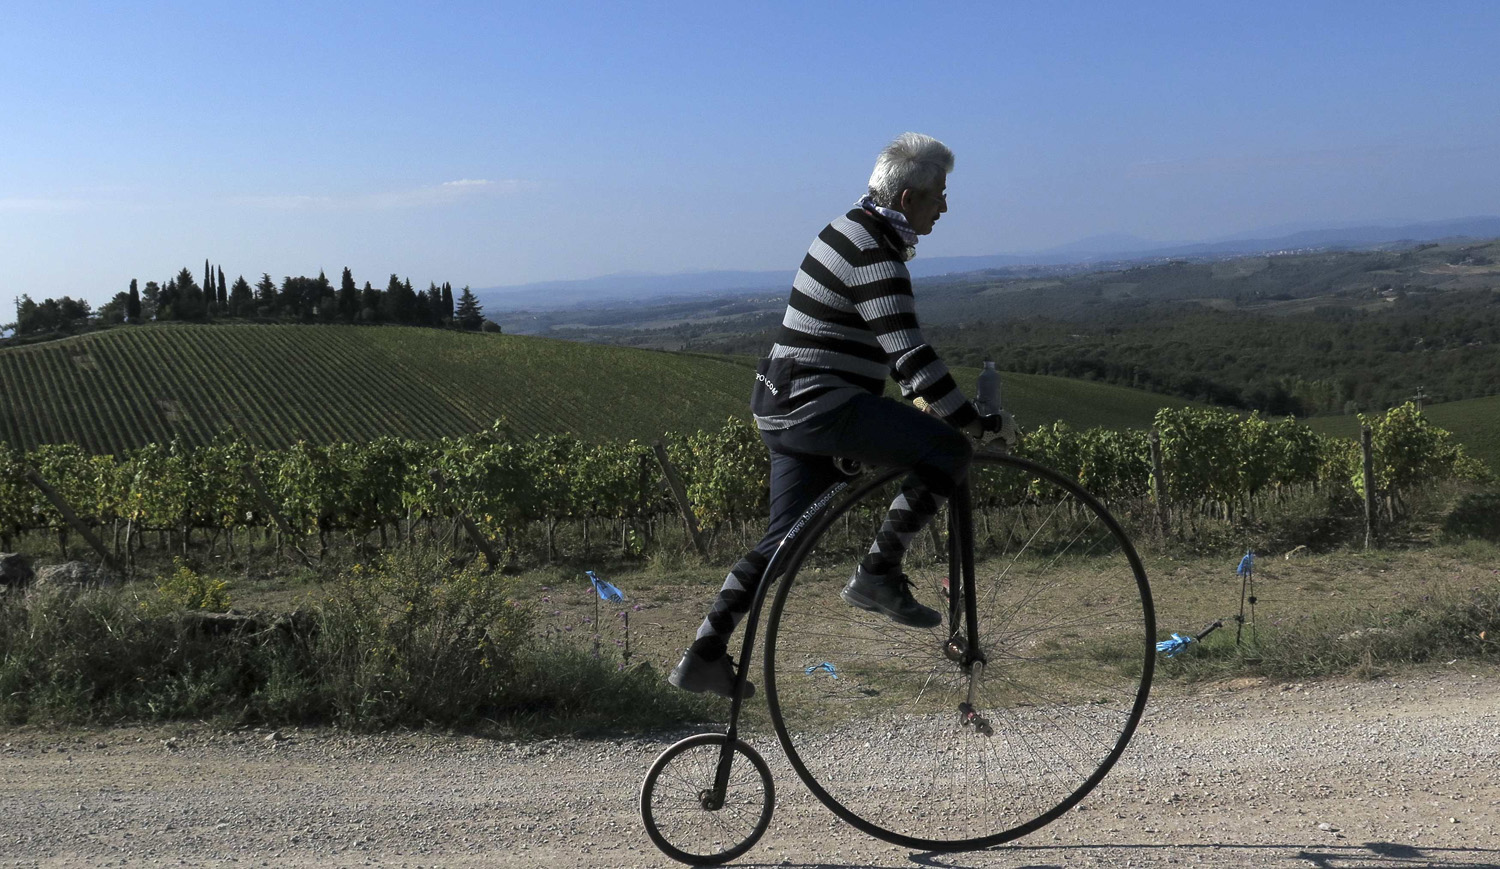 Cyclist rides on a high wheel bicycle to practices a day before the " Eroica" cycling race for old bikes in Tuscany